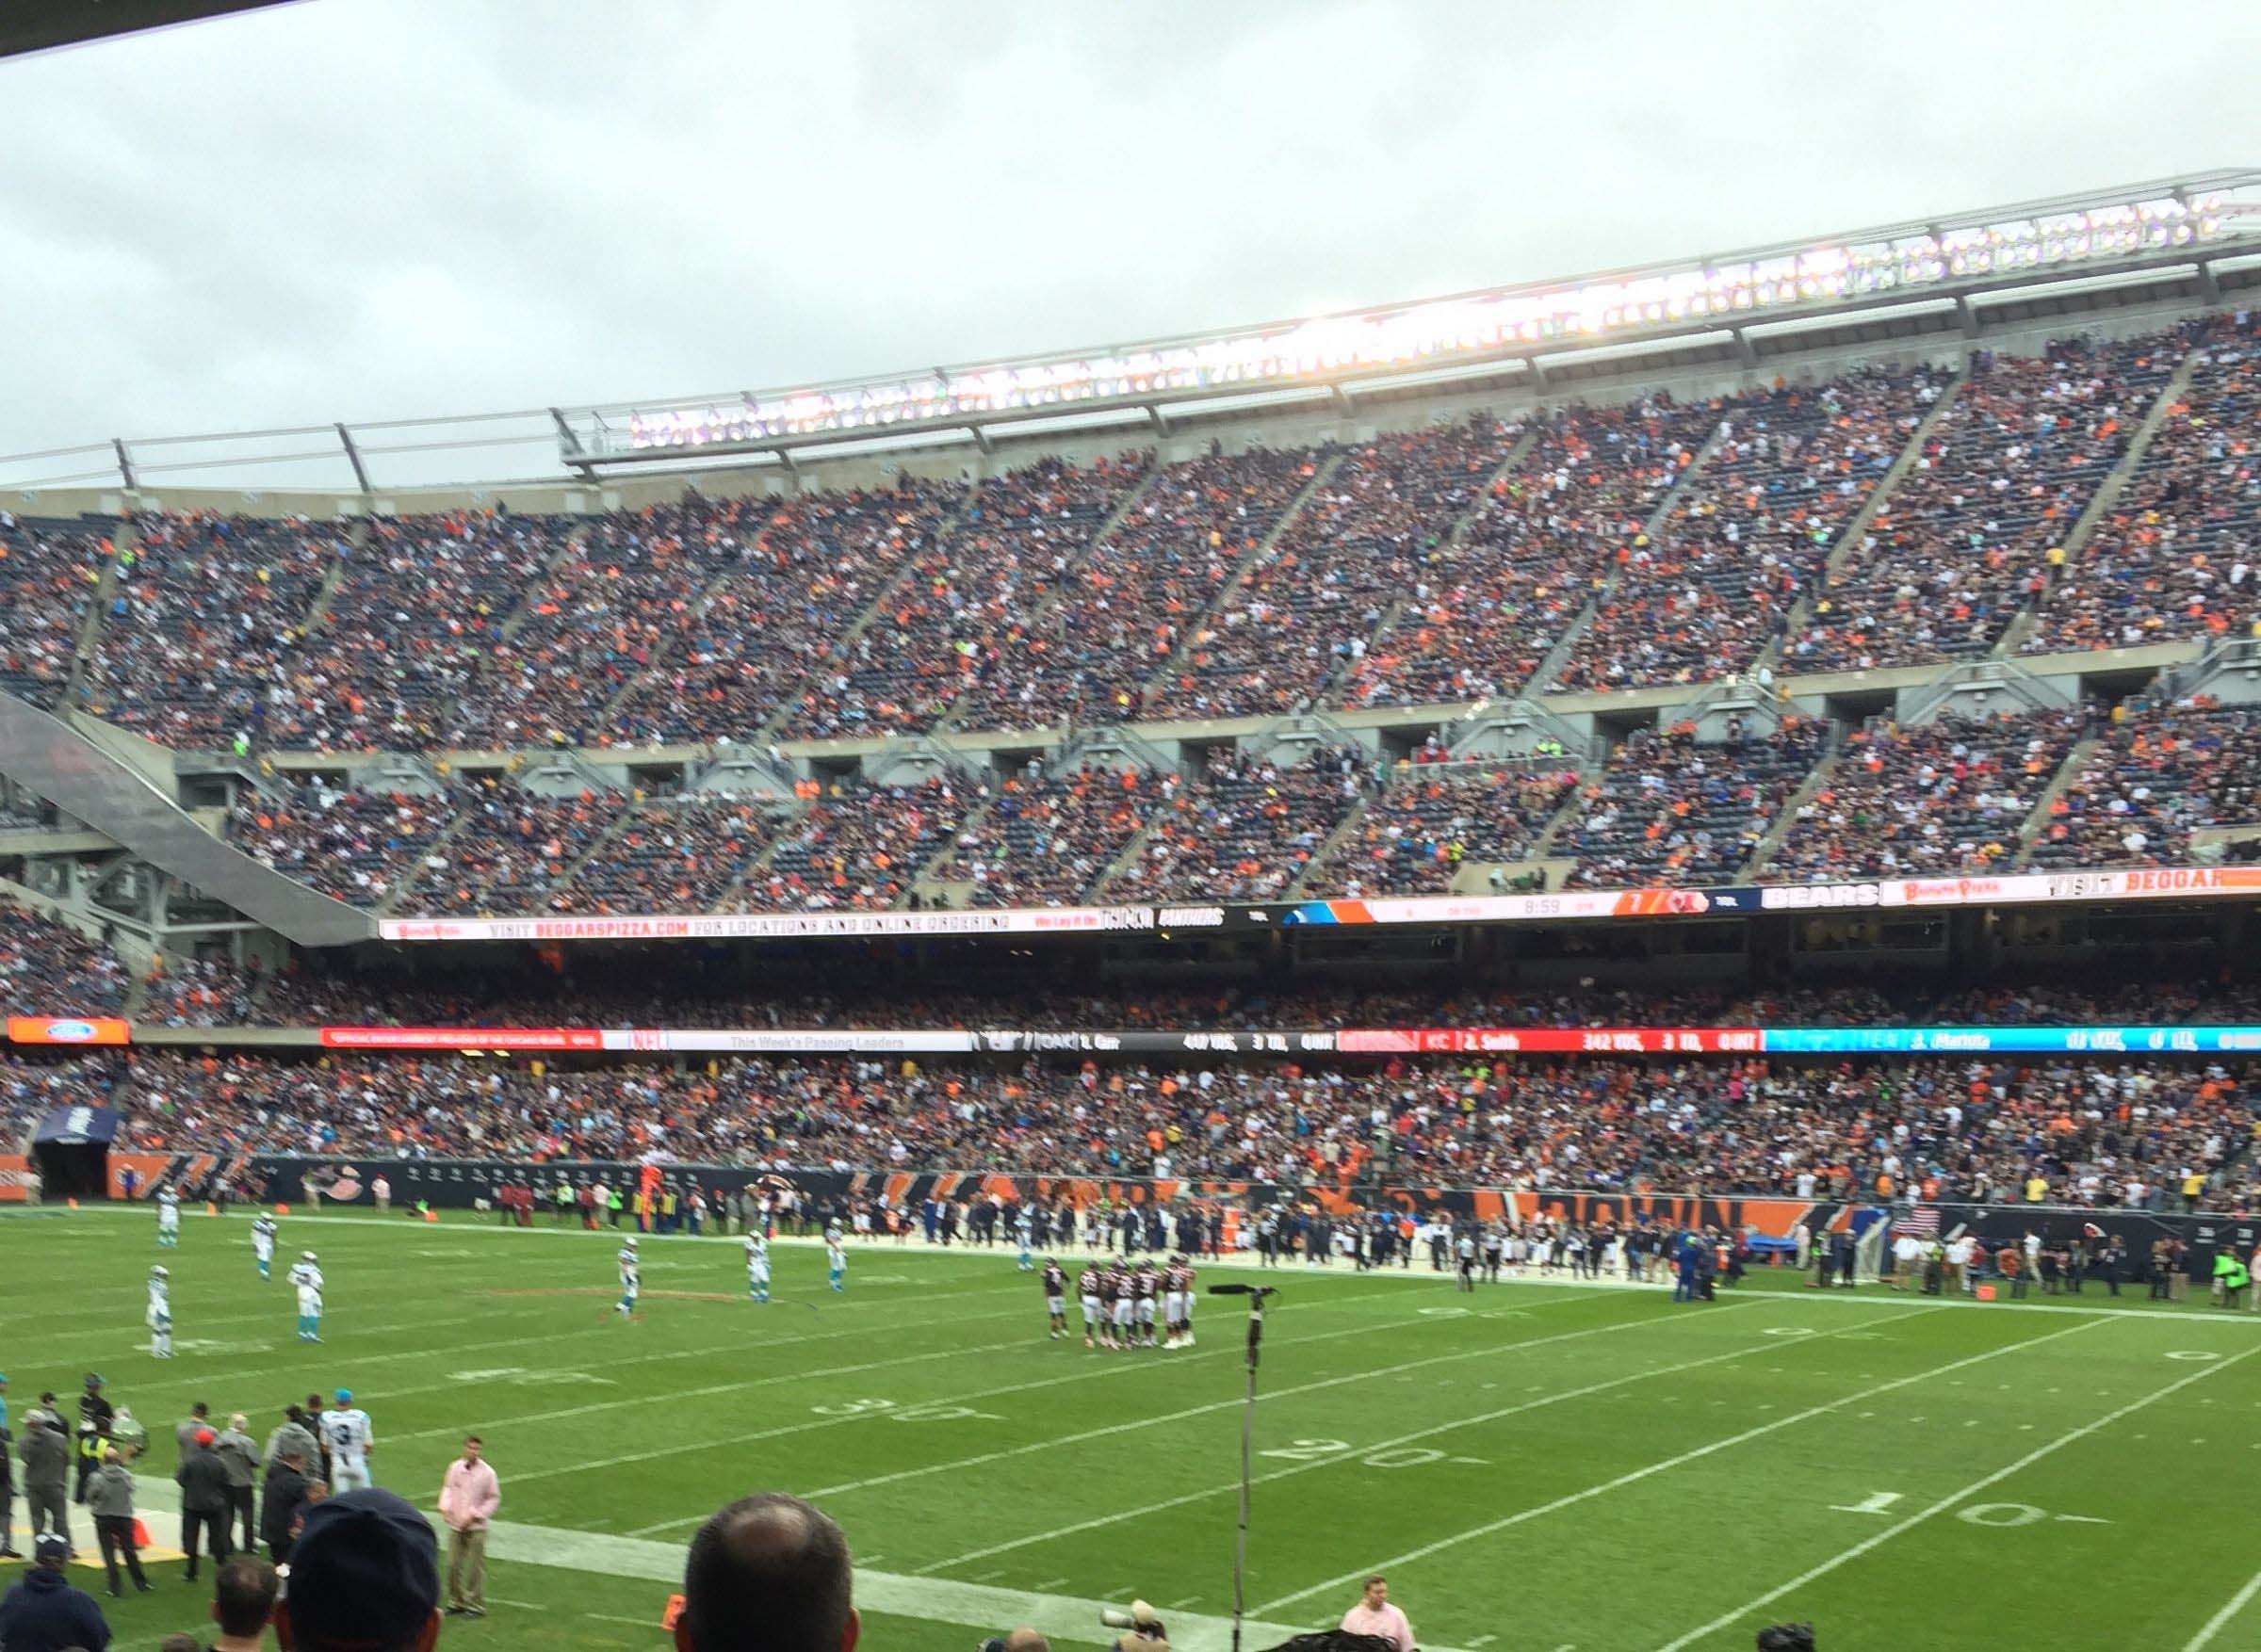 section 104, row 14 seat view  for football - soldier field